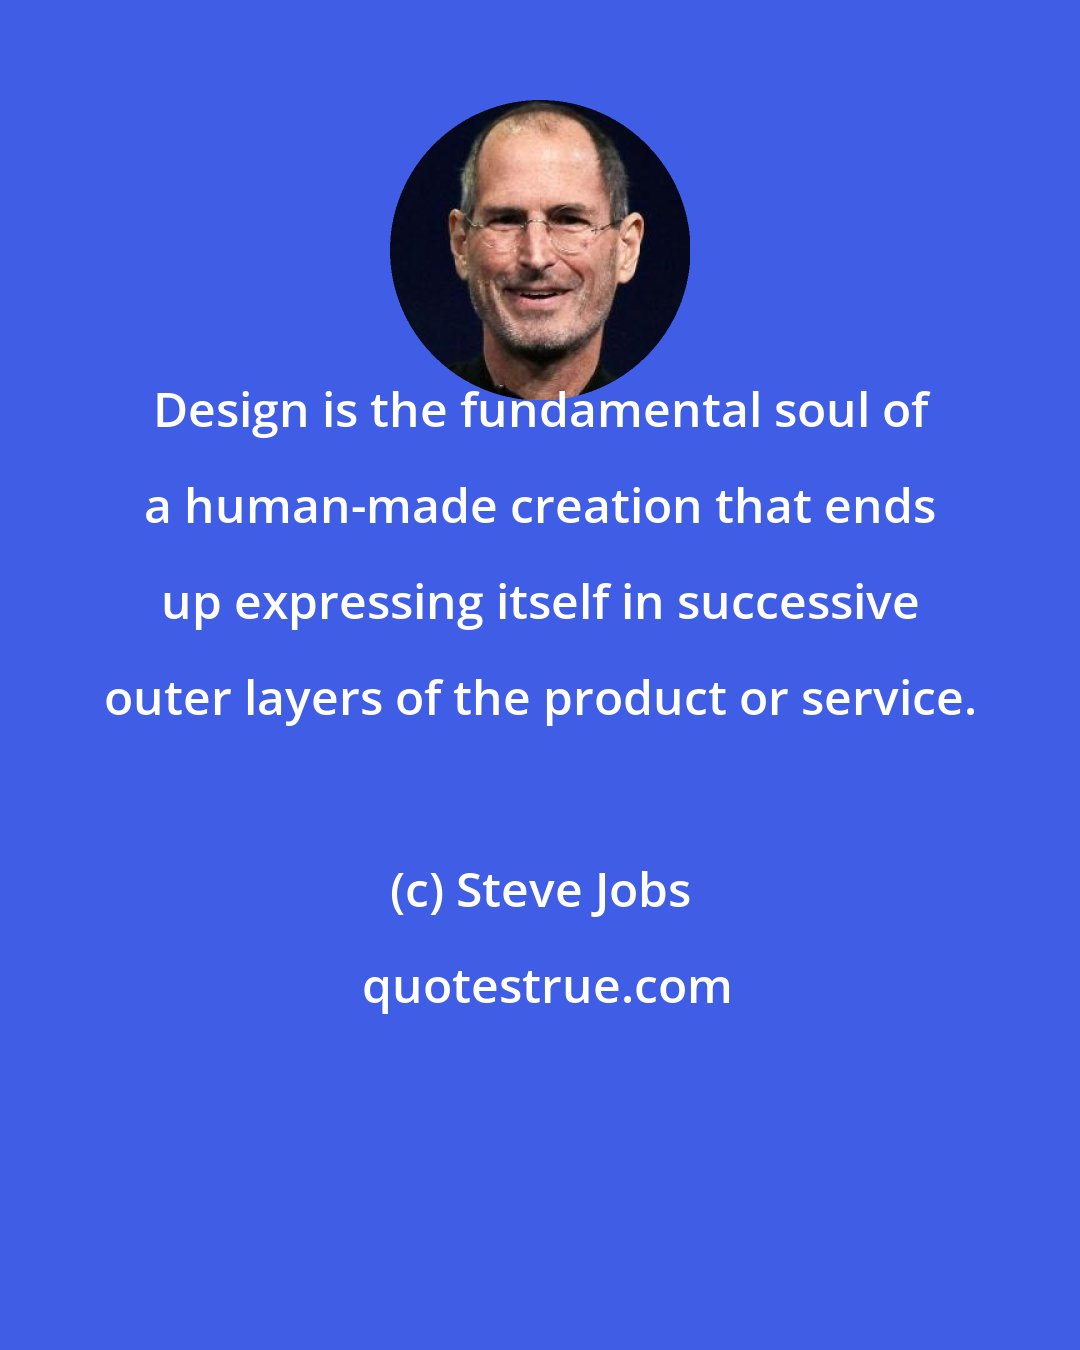 Steve Jobs: Design is the fundamental soul of a human-made creation that ends up expressing itself in successive outer layers of the product or service.